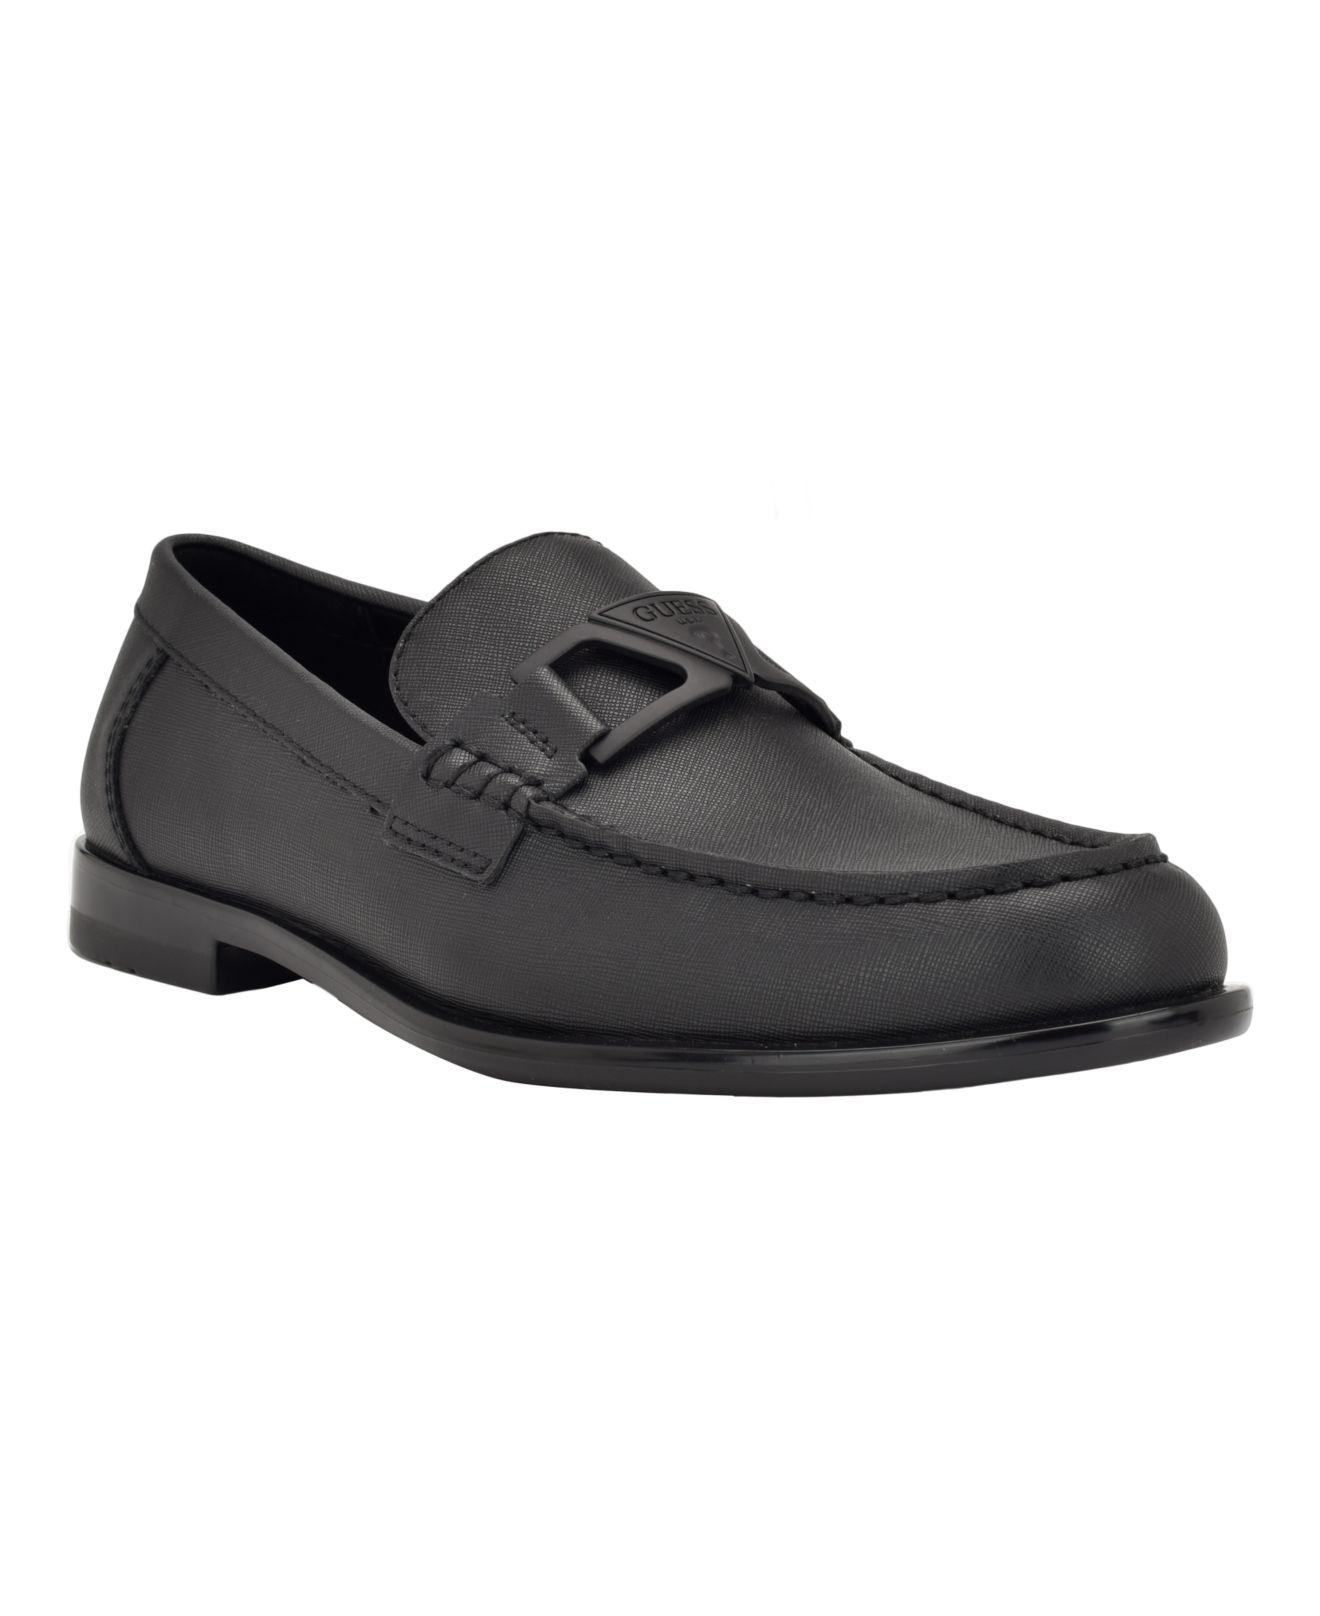 Guess Carty Moc Toe Slip On Driving Loafers in Black for Men | Lyst